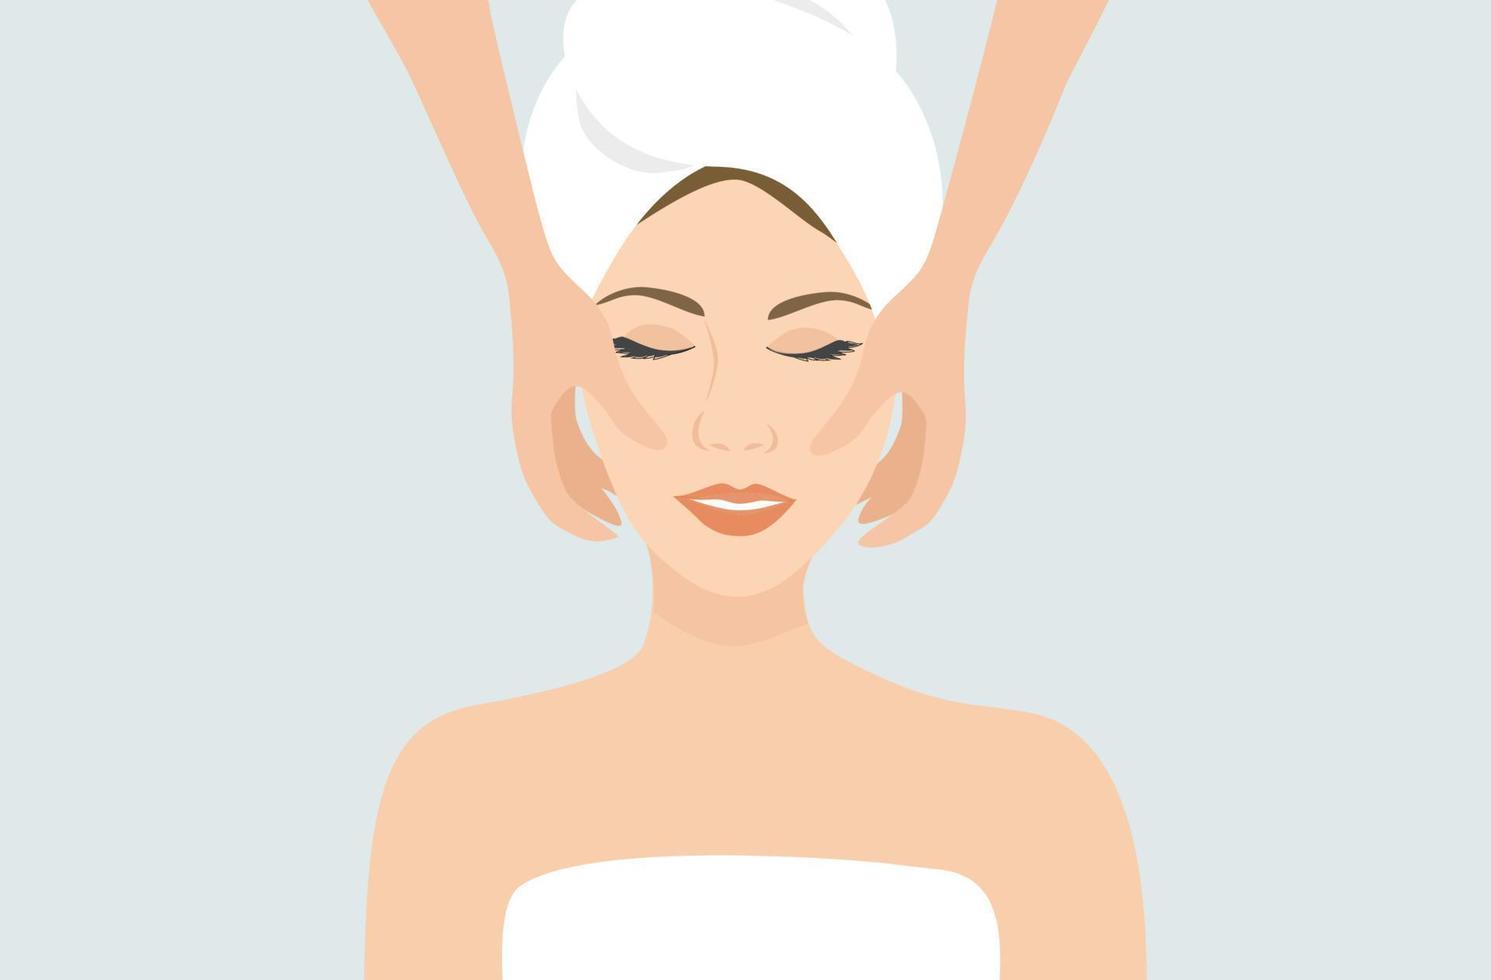 Beautiful woman taking facial massage treatment in the spa salon  vector illustration. Beauty treatment and spa massage concept